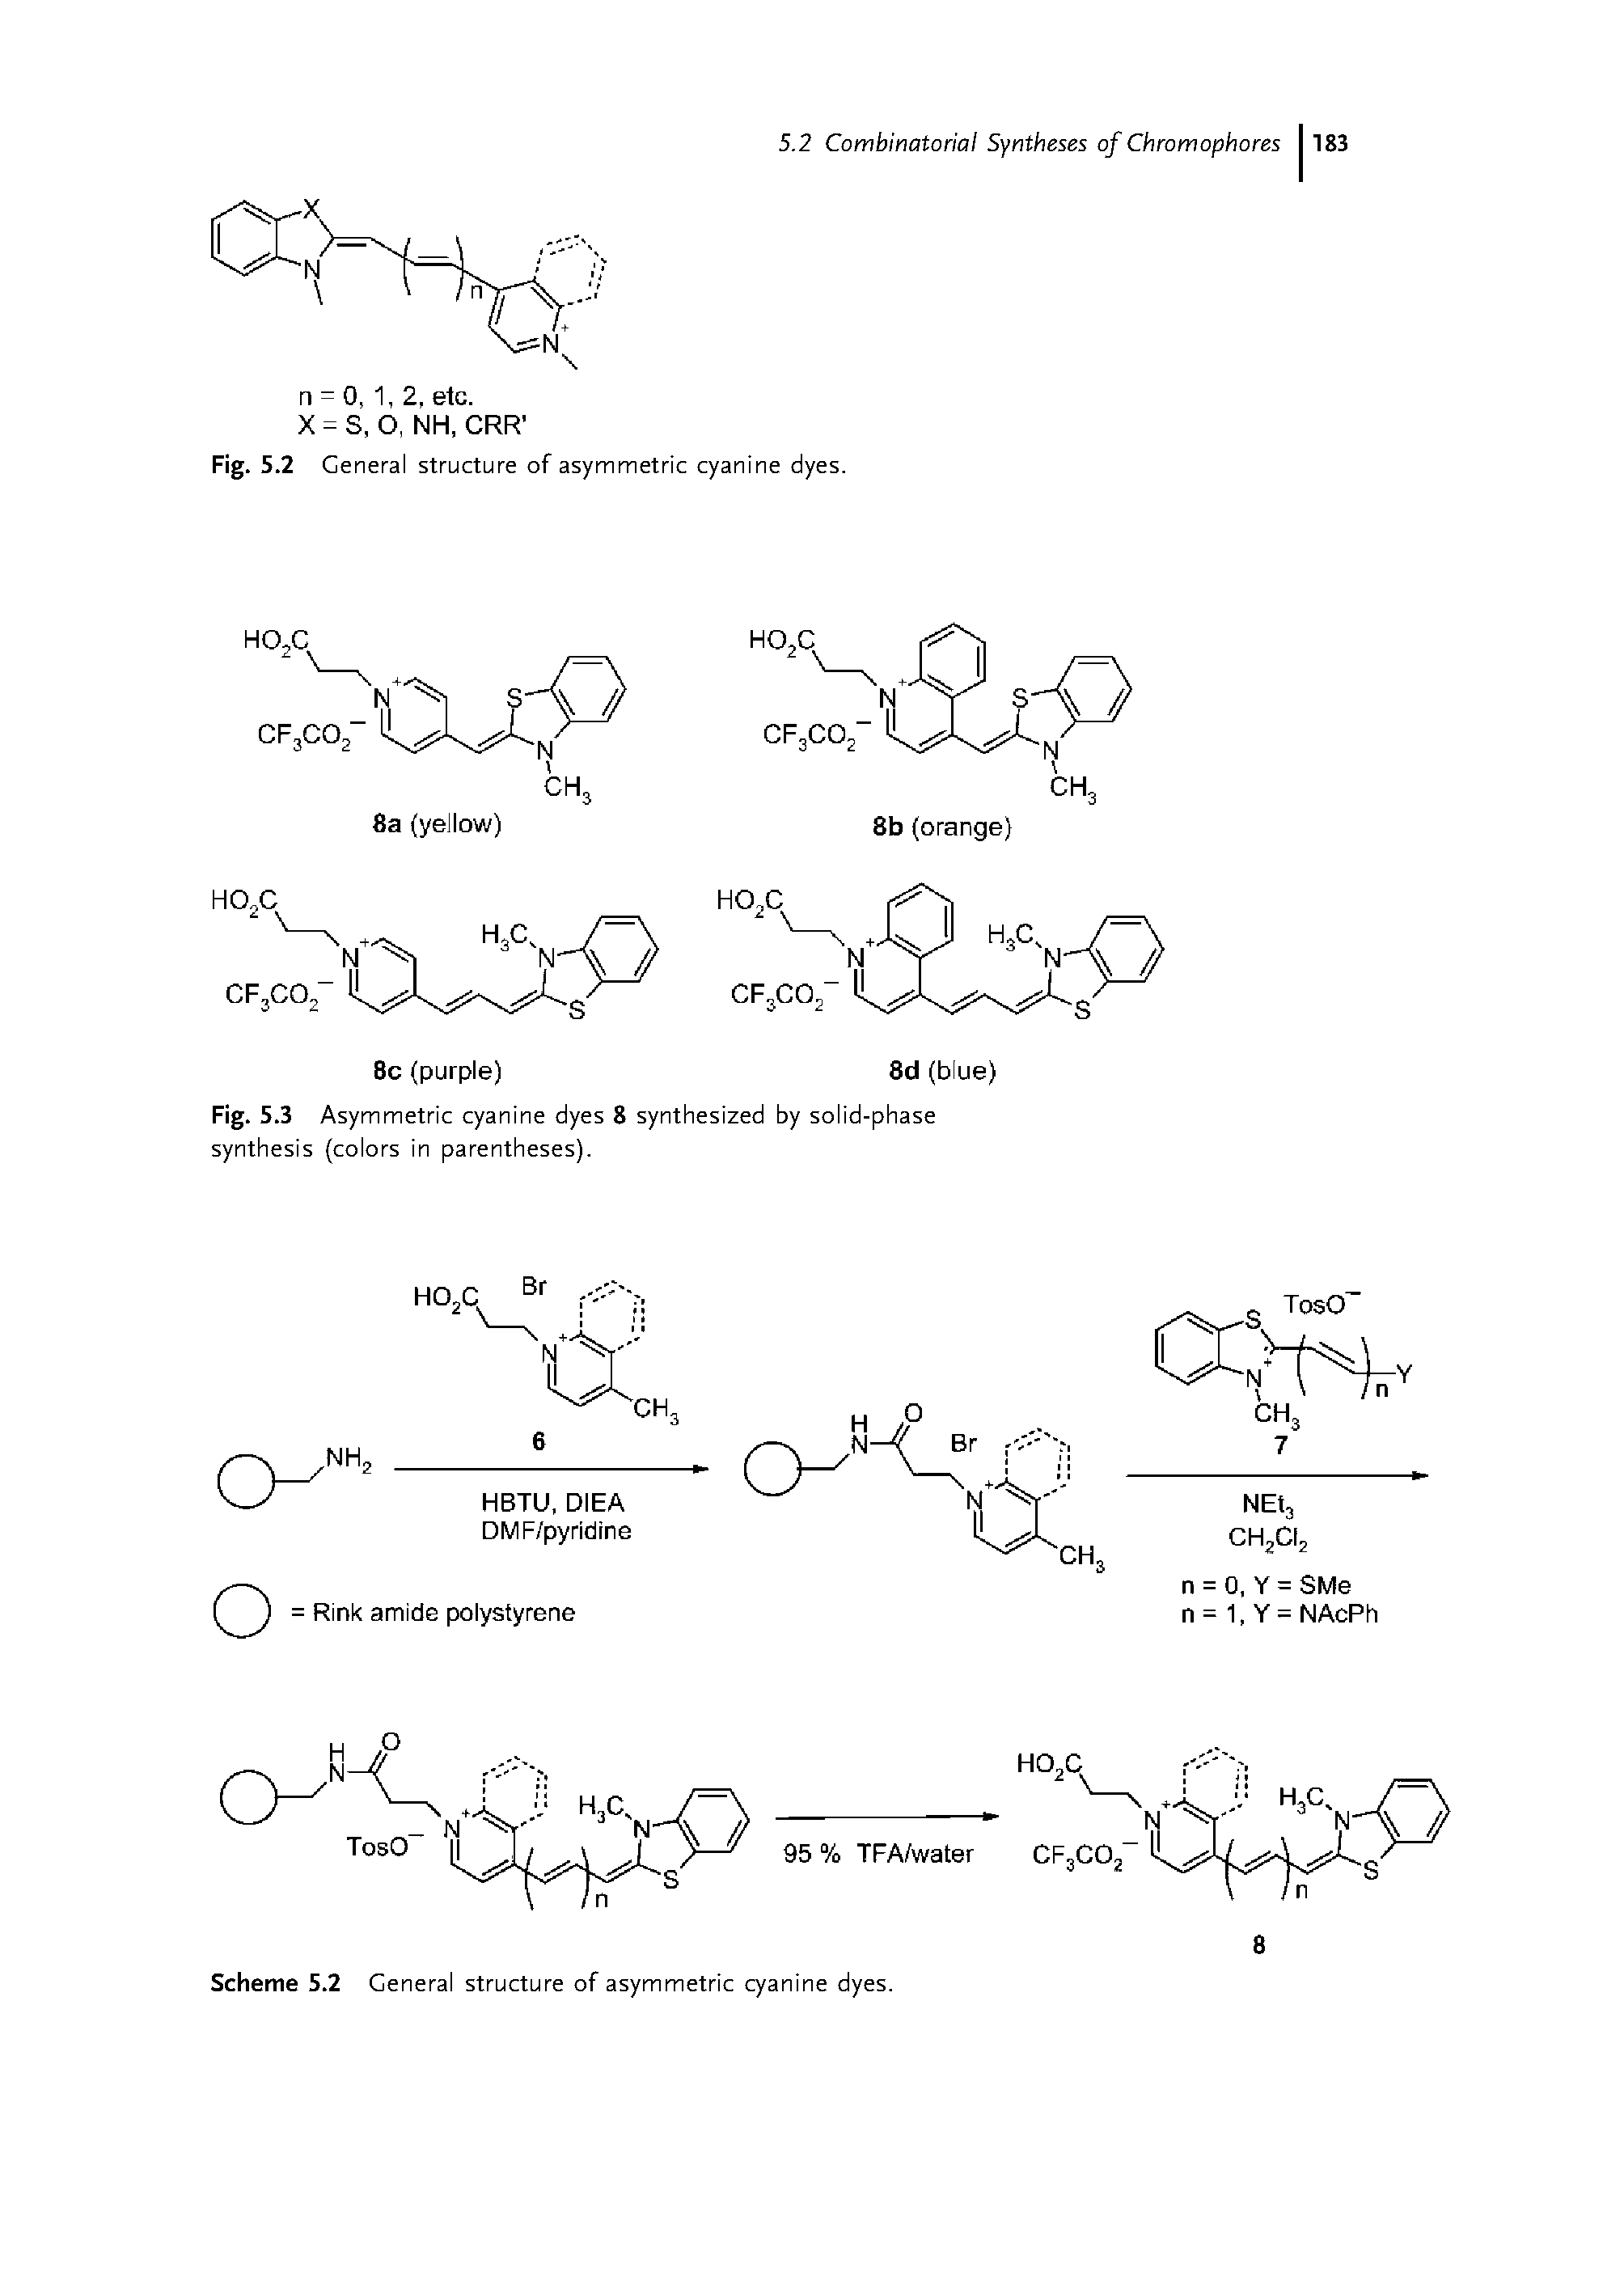 Fig. 5.3 Asymmetric cyanine dyes 8 synthesized by solid-phase synthesis (colors in parentheses).